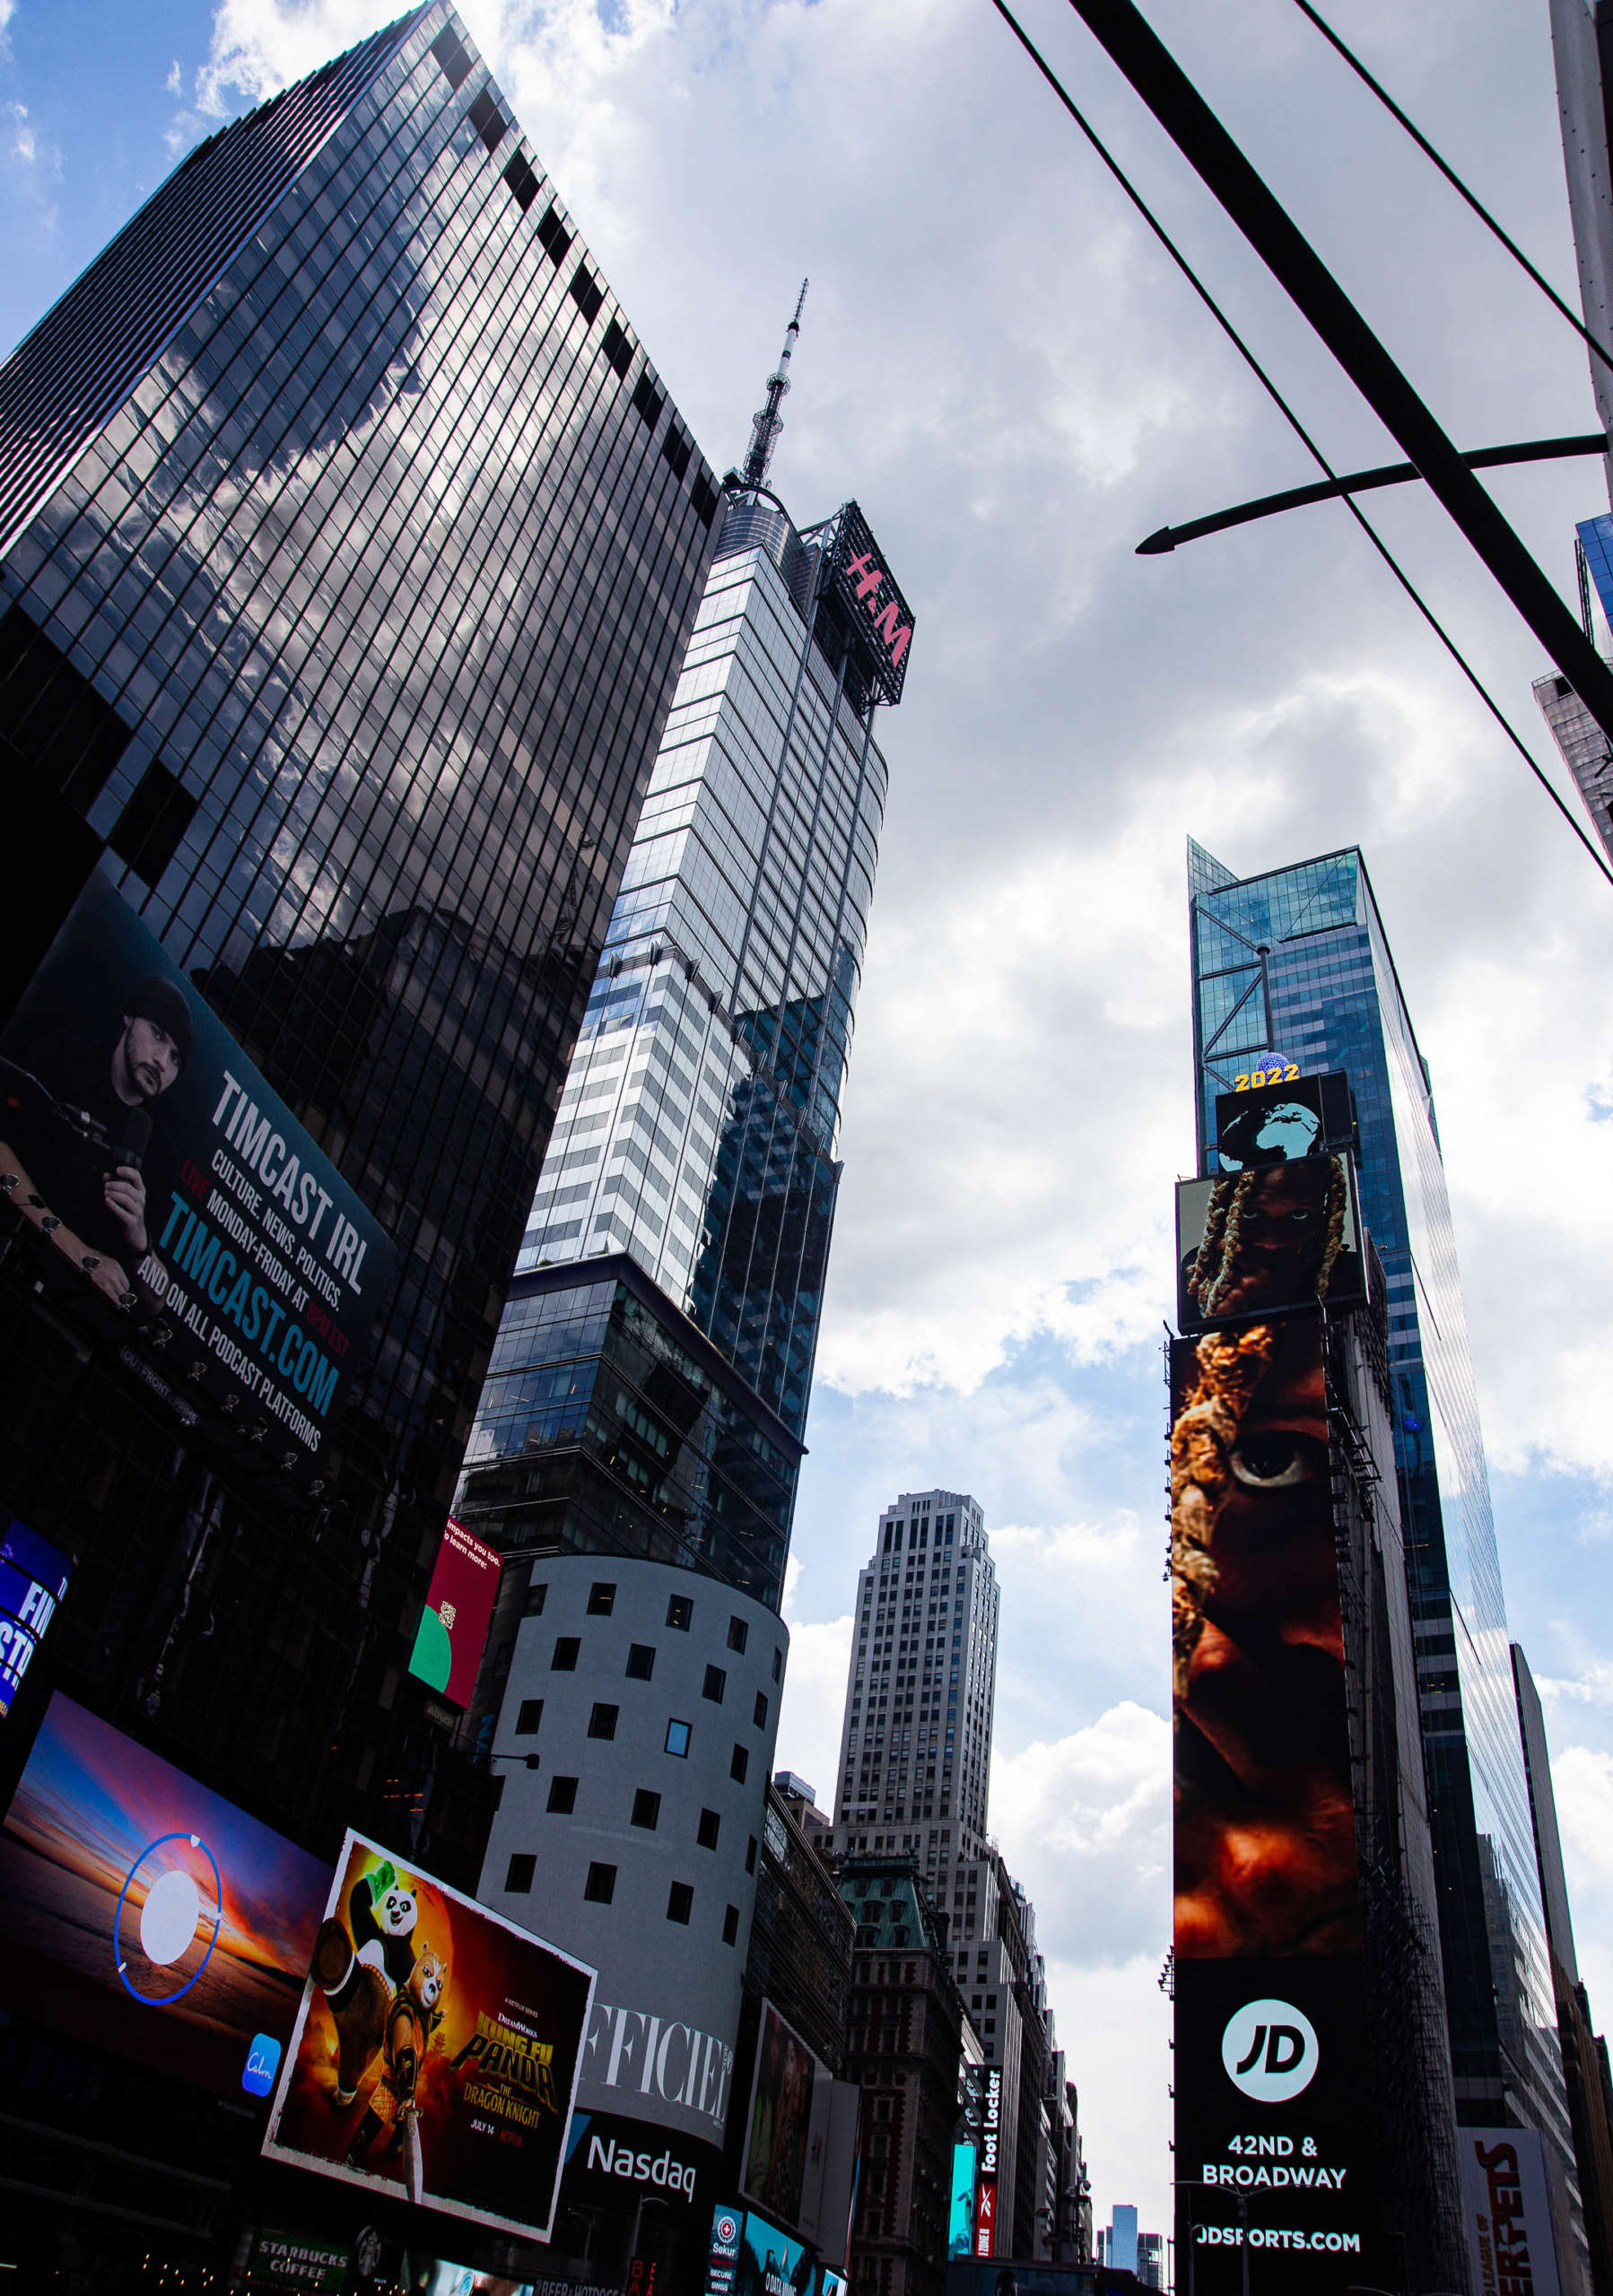 A low-angle shot of several tall buildings in Times Square, NYC. A large white cloud in the blue sky reflects off the mirrored windows of the buildings. The lower sections of the skyscrapers are covered in advertisements with various text: Timcast.com, H&M, Kung Fu Panda: The Dragon Knight, Nasdaq, 2022, JDSports, 42nd & Broadway. More billboards are visible on buildings as the line of the street vanishes into the distance.